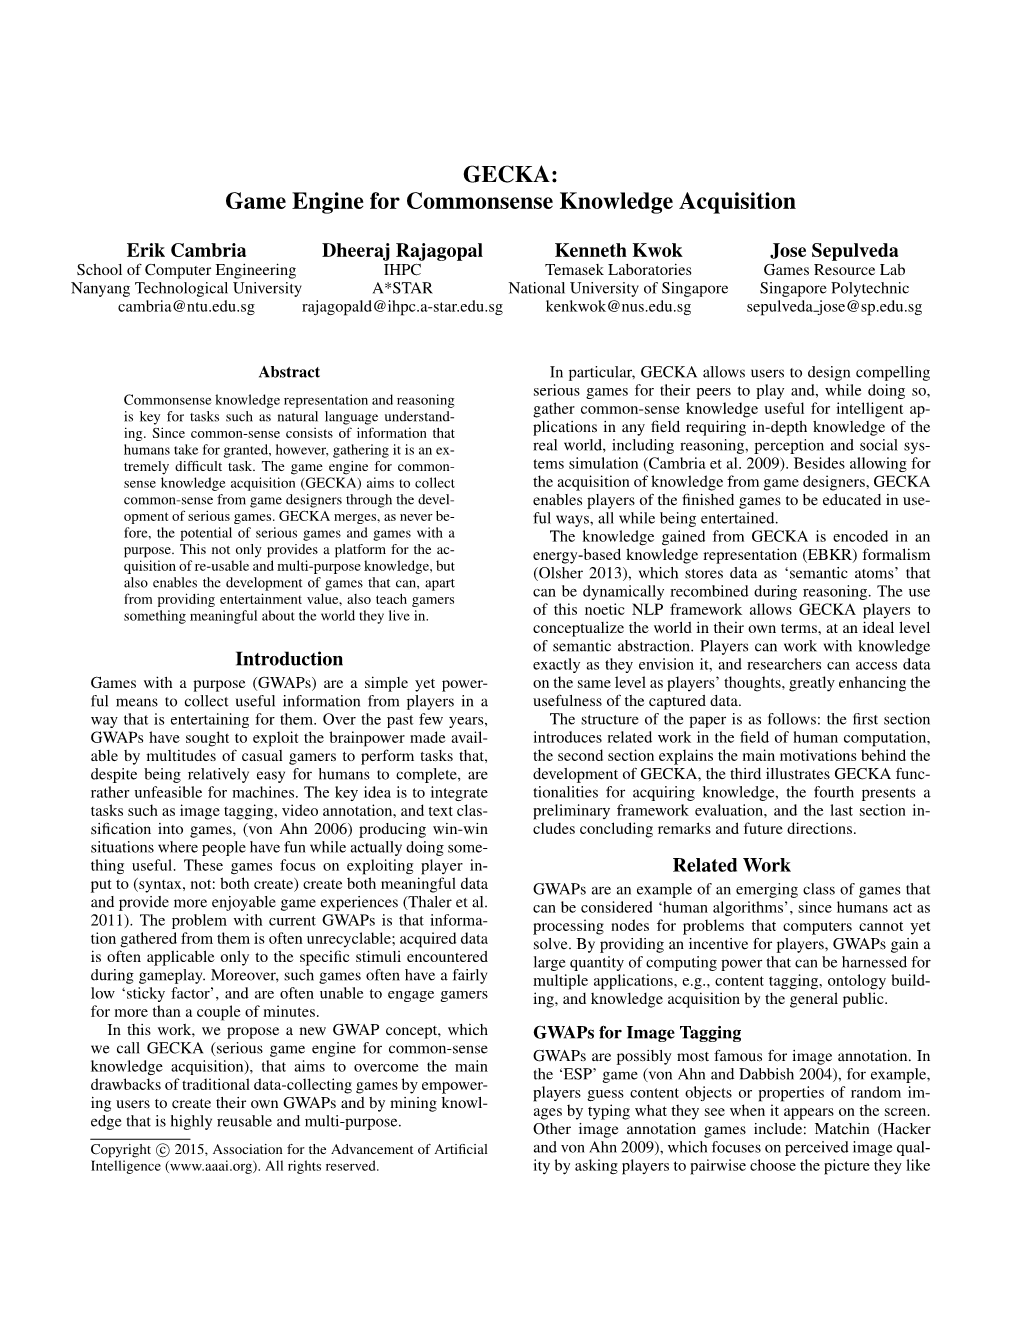 GECKA: Game Engine for Commonsense Knowledge Acquisition